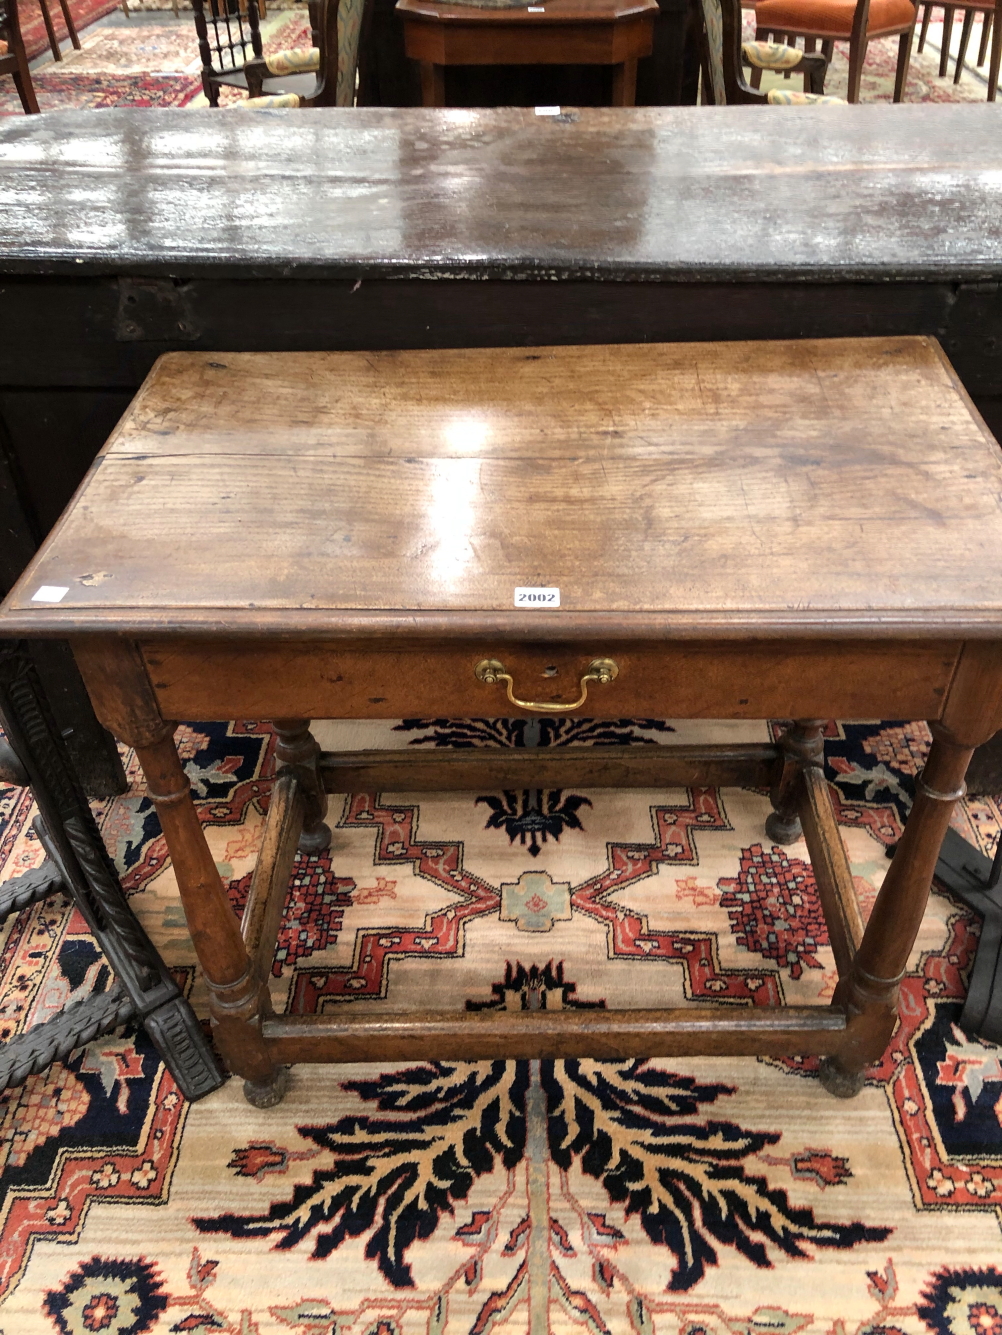 AN 18th C. OAK SIDE TABLE WITH SINGLE DRAWER ABOVE GUN BARREL LEGS JOINED BY STRETCHERS ABOVE THE